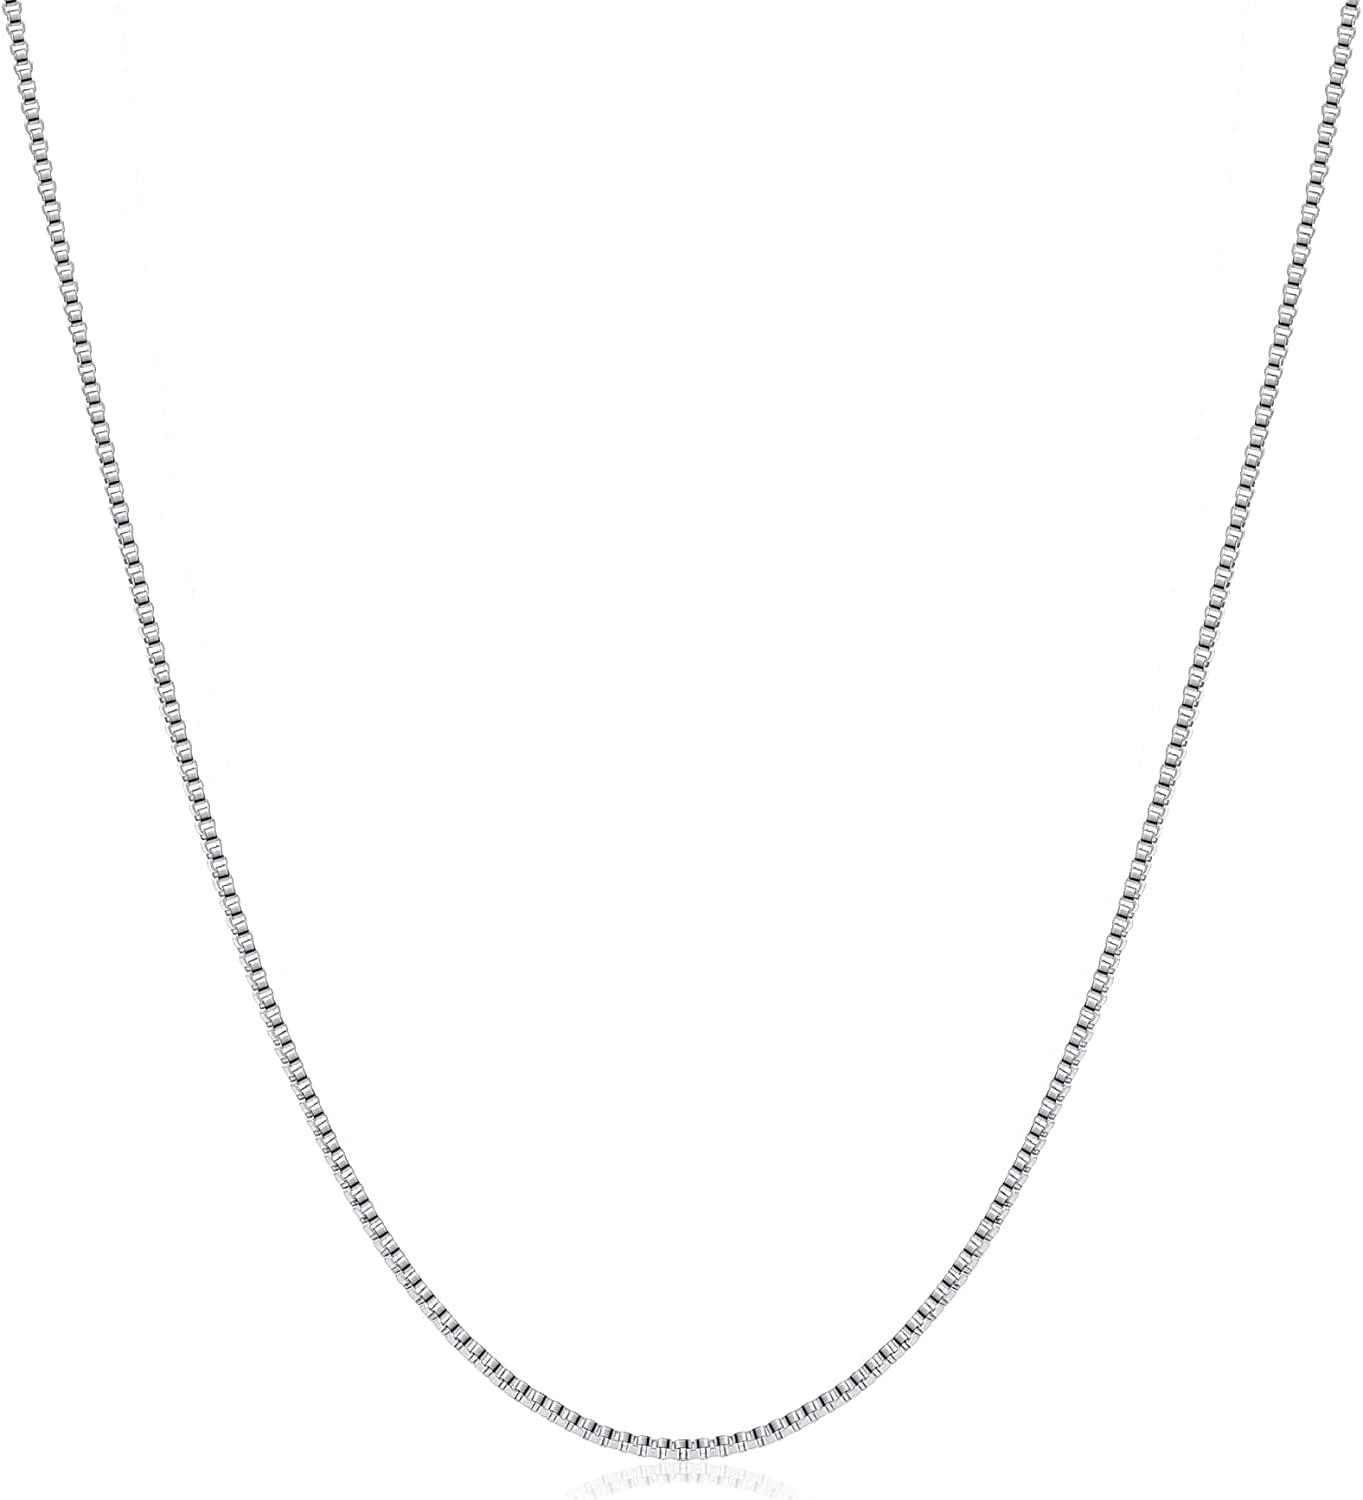 Fiusem 1.2mm Box Chain Necklace for Women, 16"-24" Thin Silver Tone Necklace Chain for Women, Stainless Steel Womens Chains 16, 18, 20, 22, 24 Inch